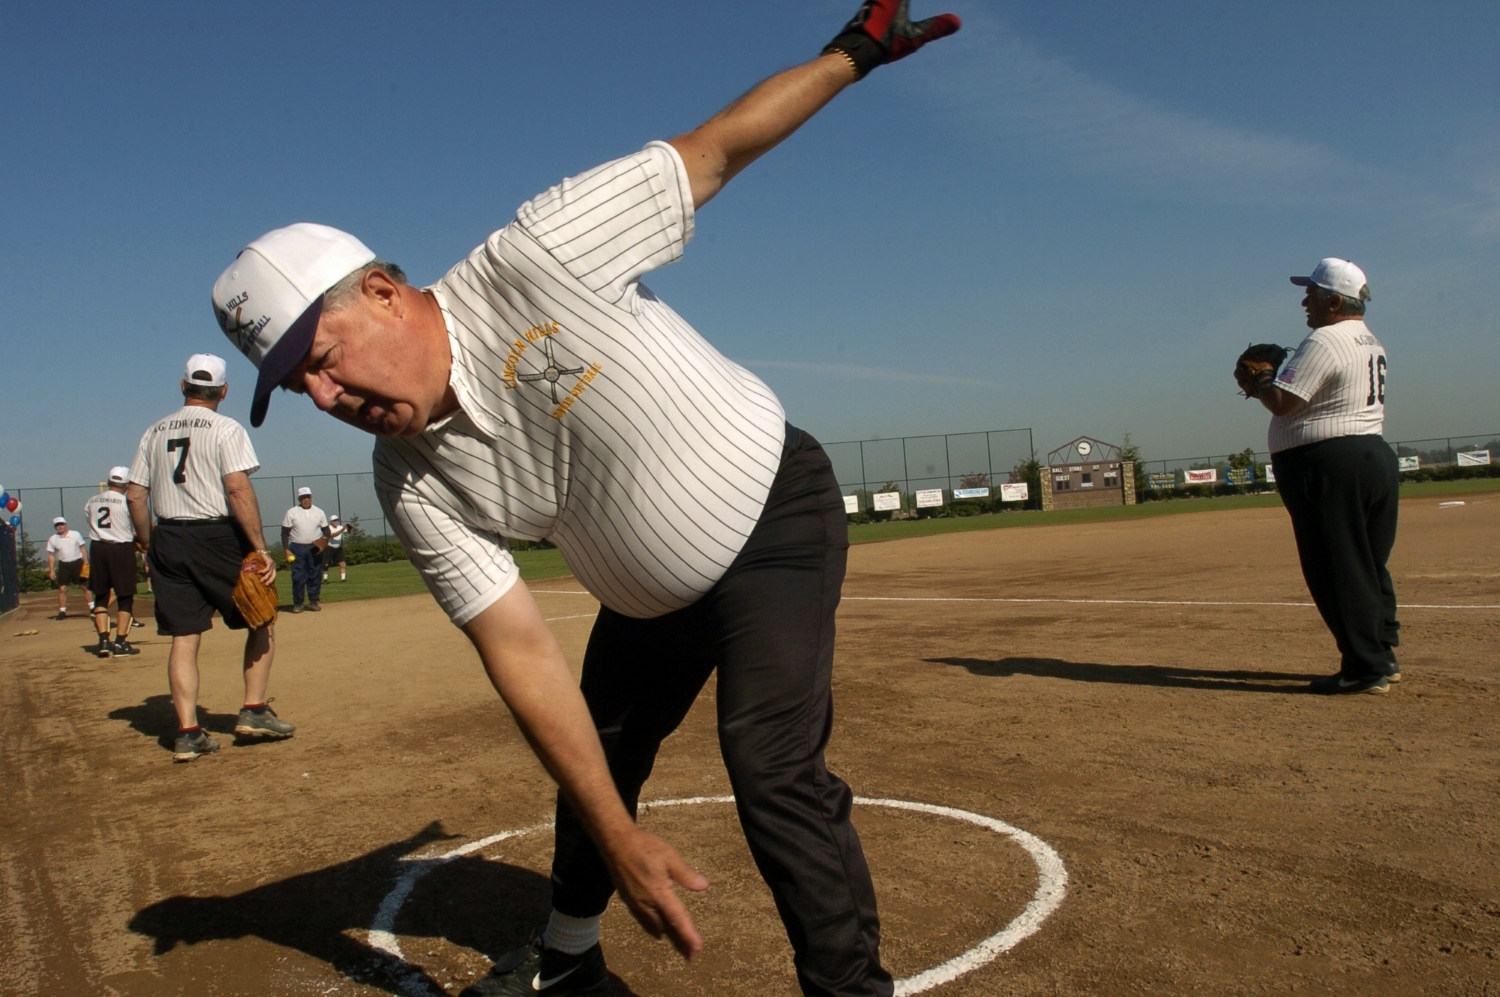  2nd baseman John Klea stretches out just prior to the opening game of the Lincoln Hills Senior Softball season at Sun City Lincoln Hills on Wednesday April 7, 2004. 